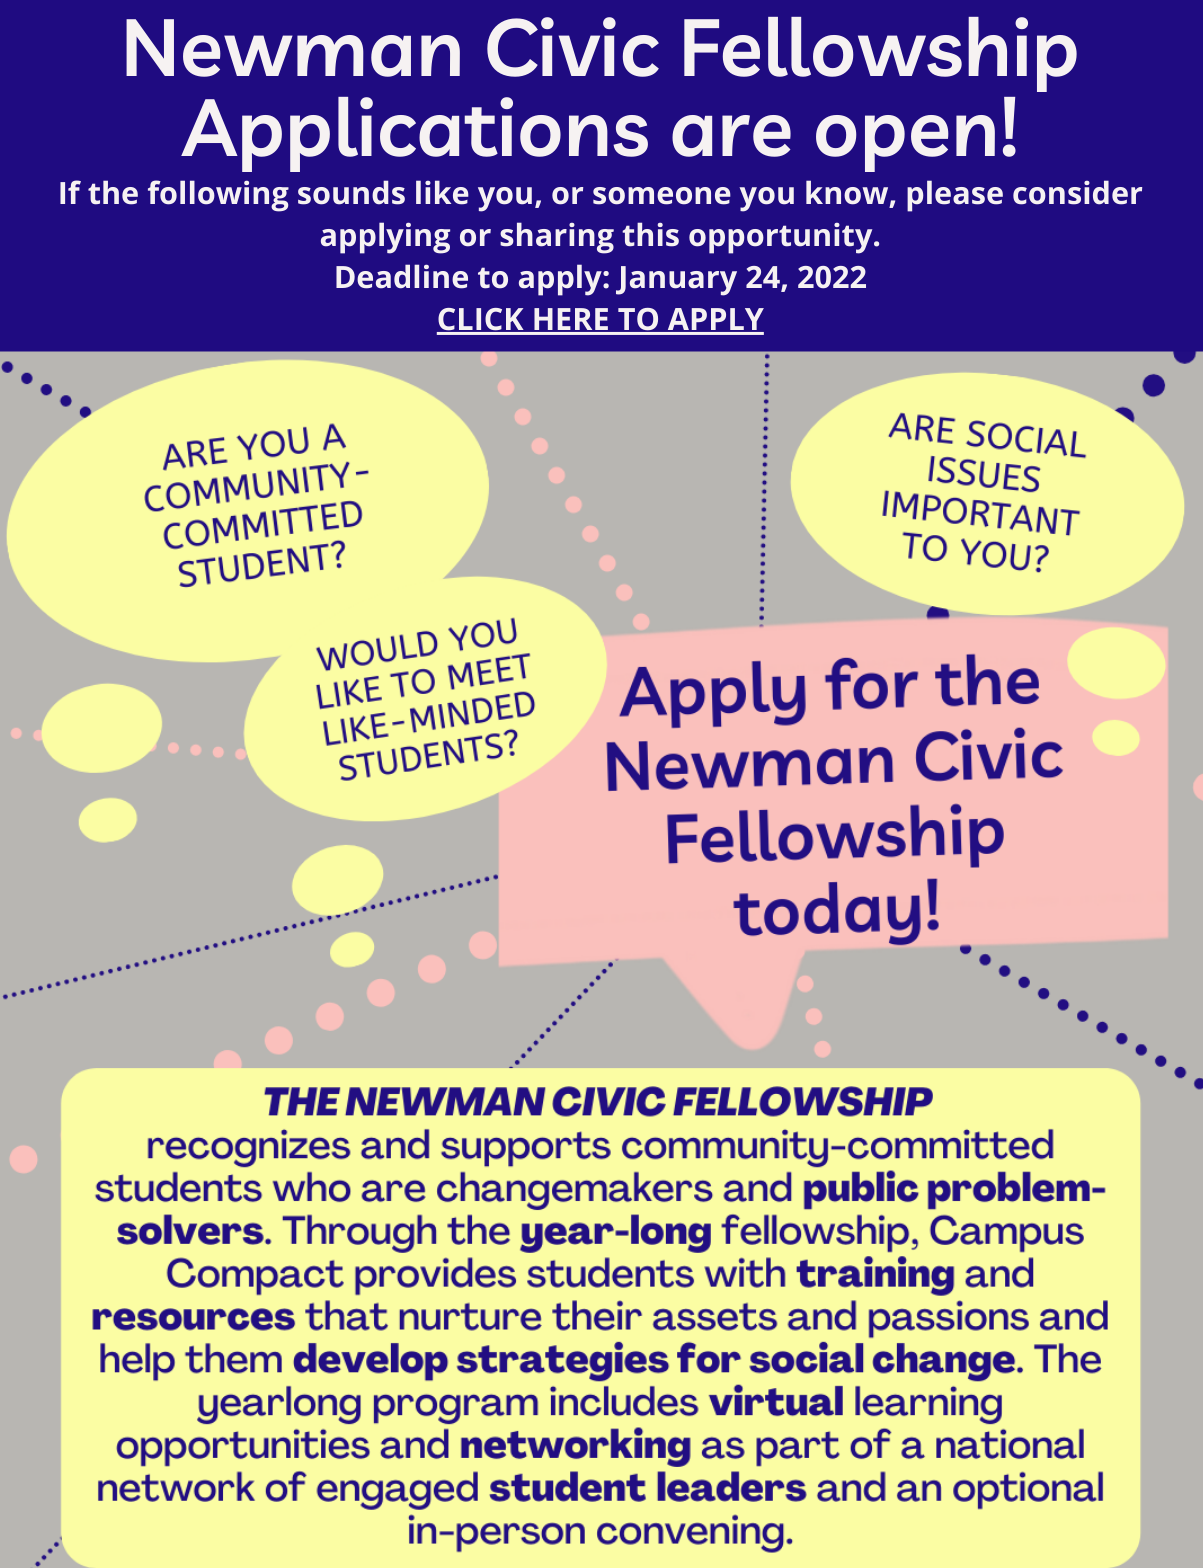 apply for the newman civic fellowship today! application deadline is january 24, 2022